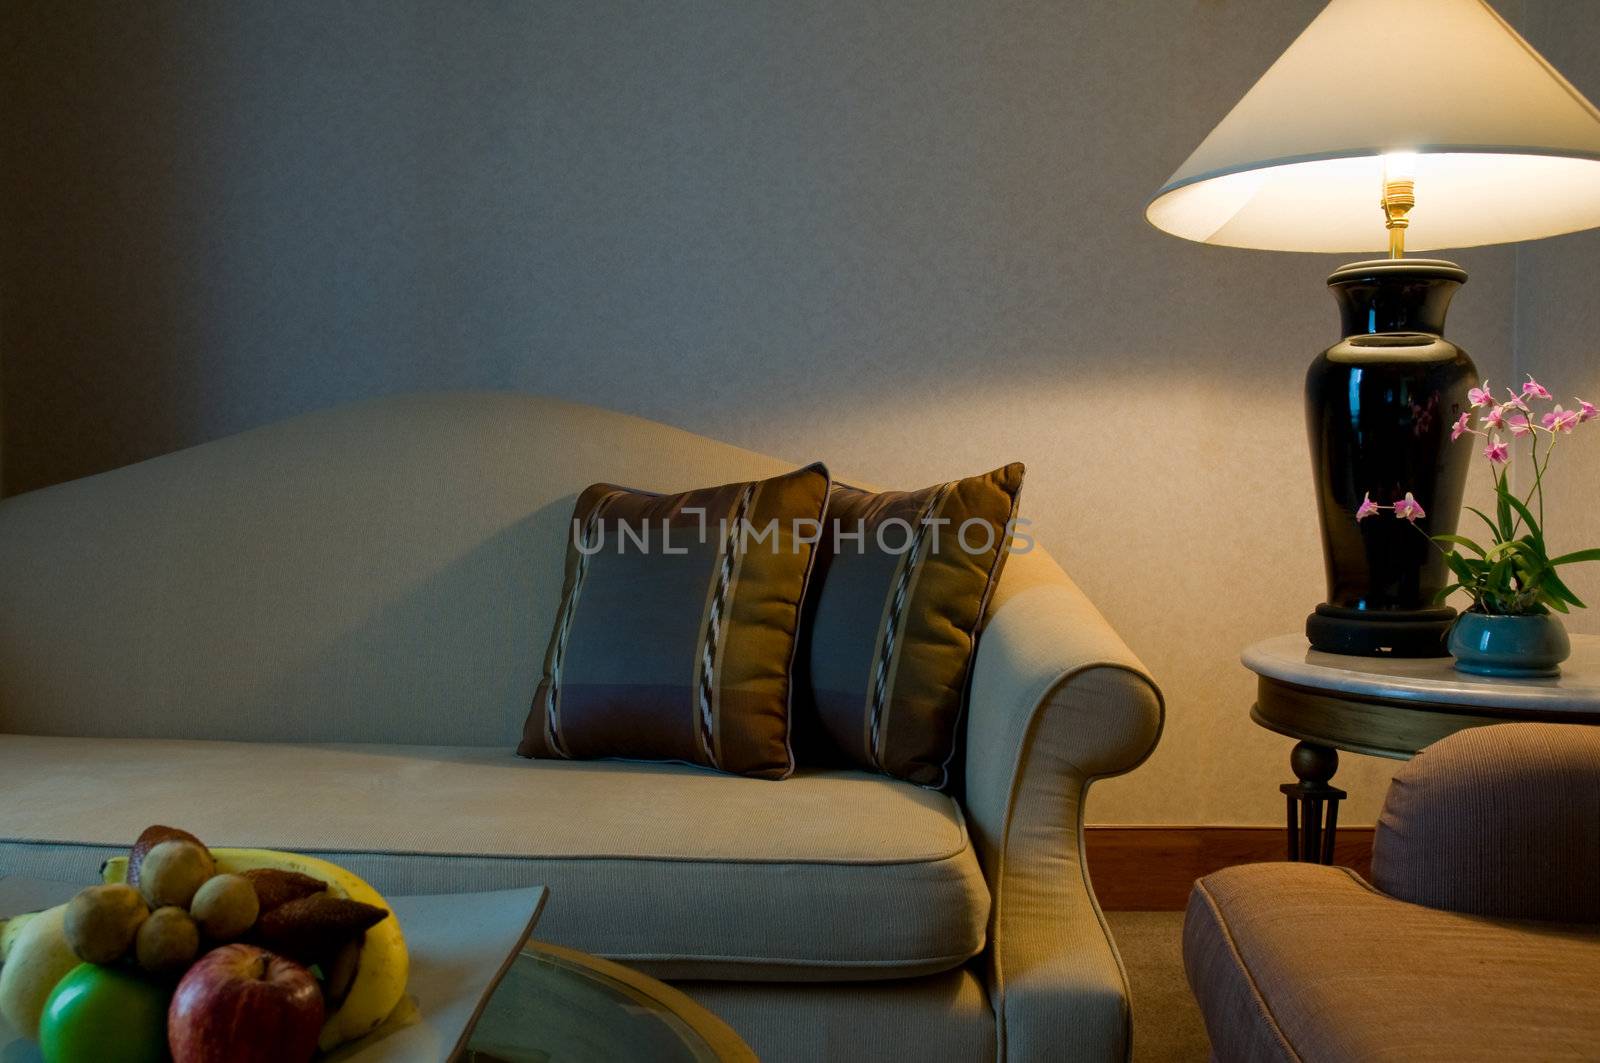 Sitting area of a 5 star luxury hotel suite room, with fruit and orchids